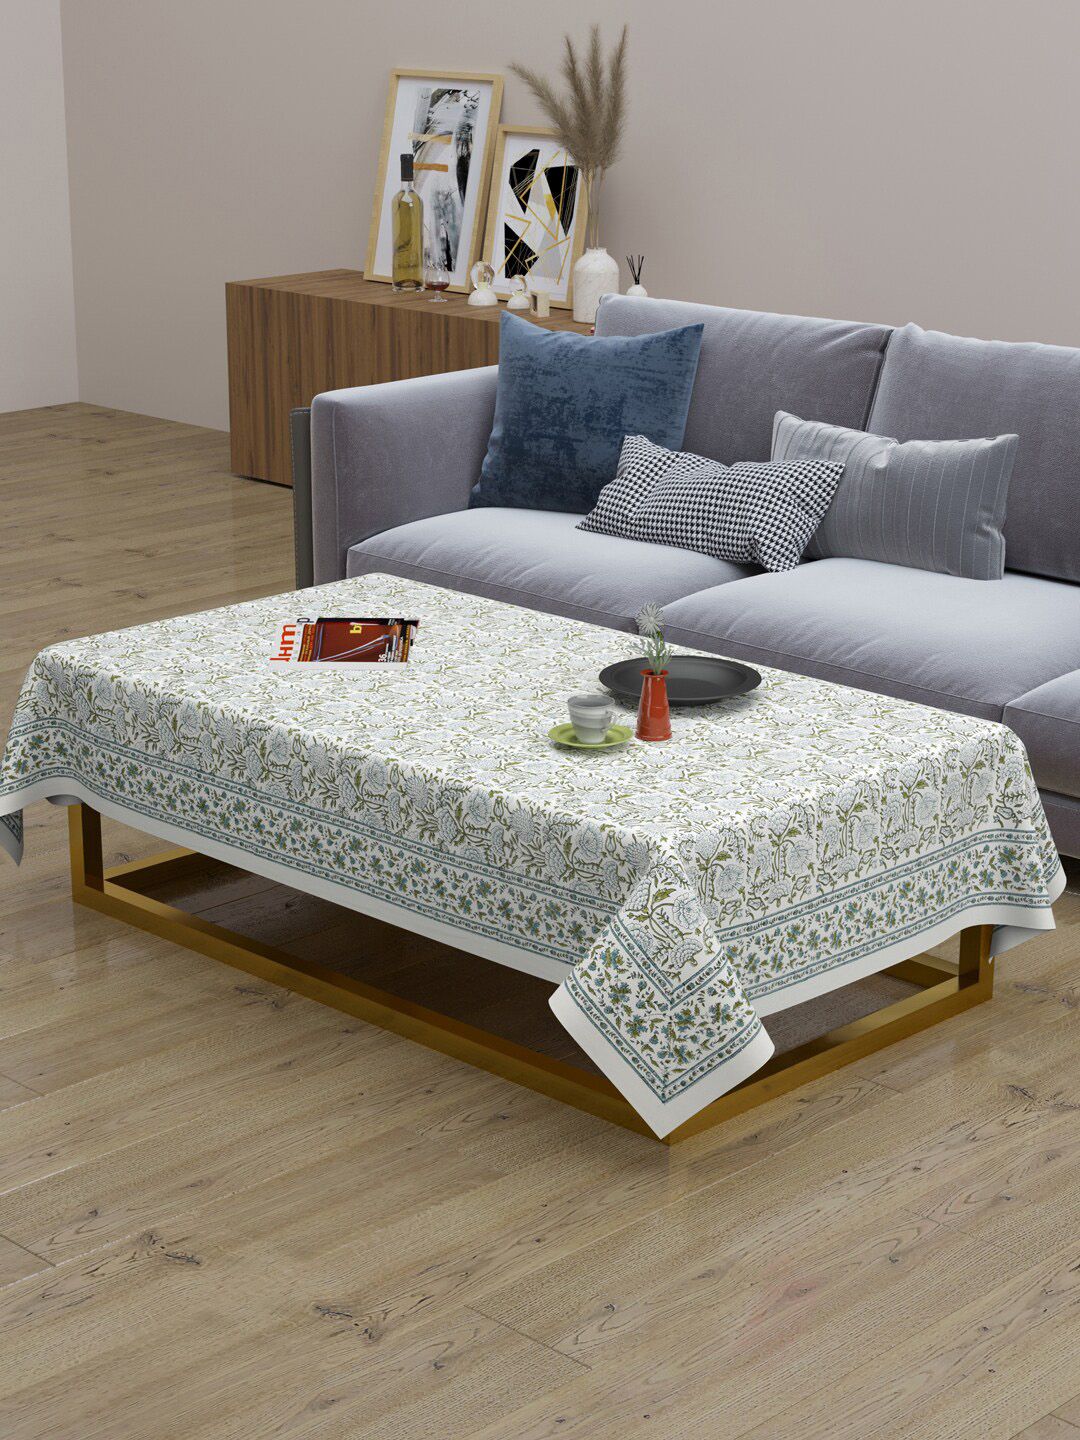 Gulaab Jaipur Printed Cotton 4-Seater Table Cover Price in India